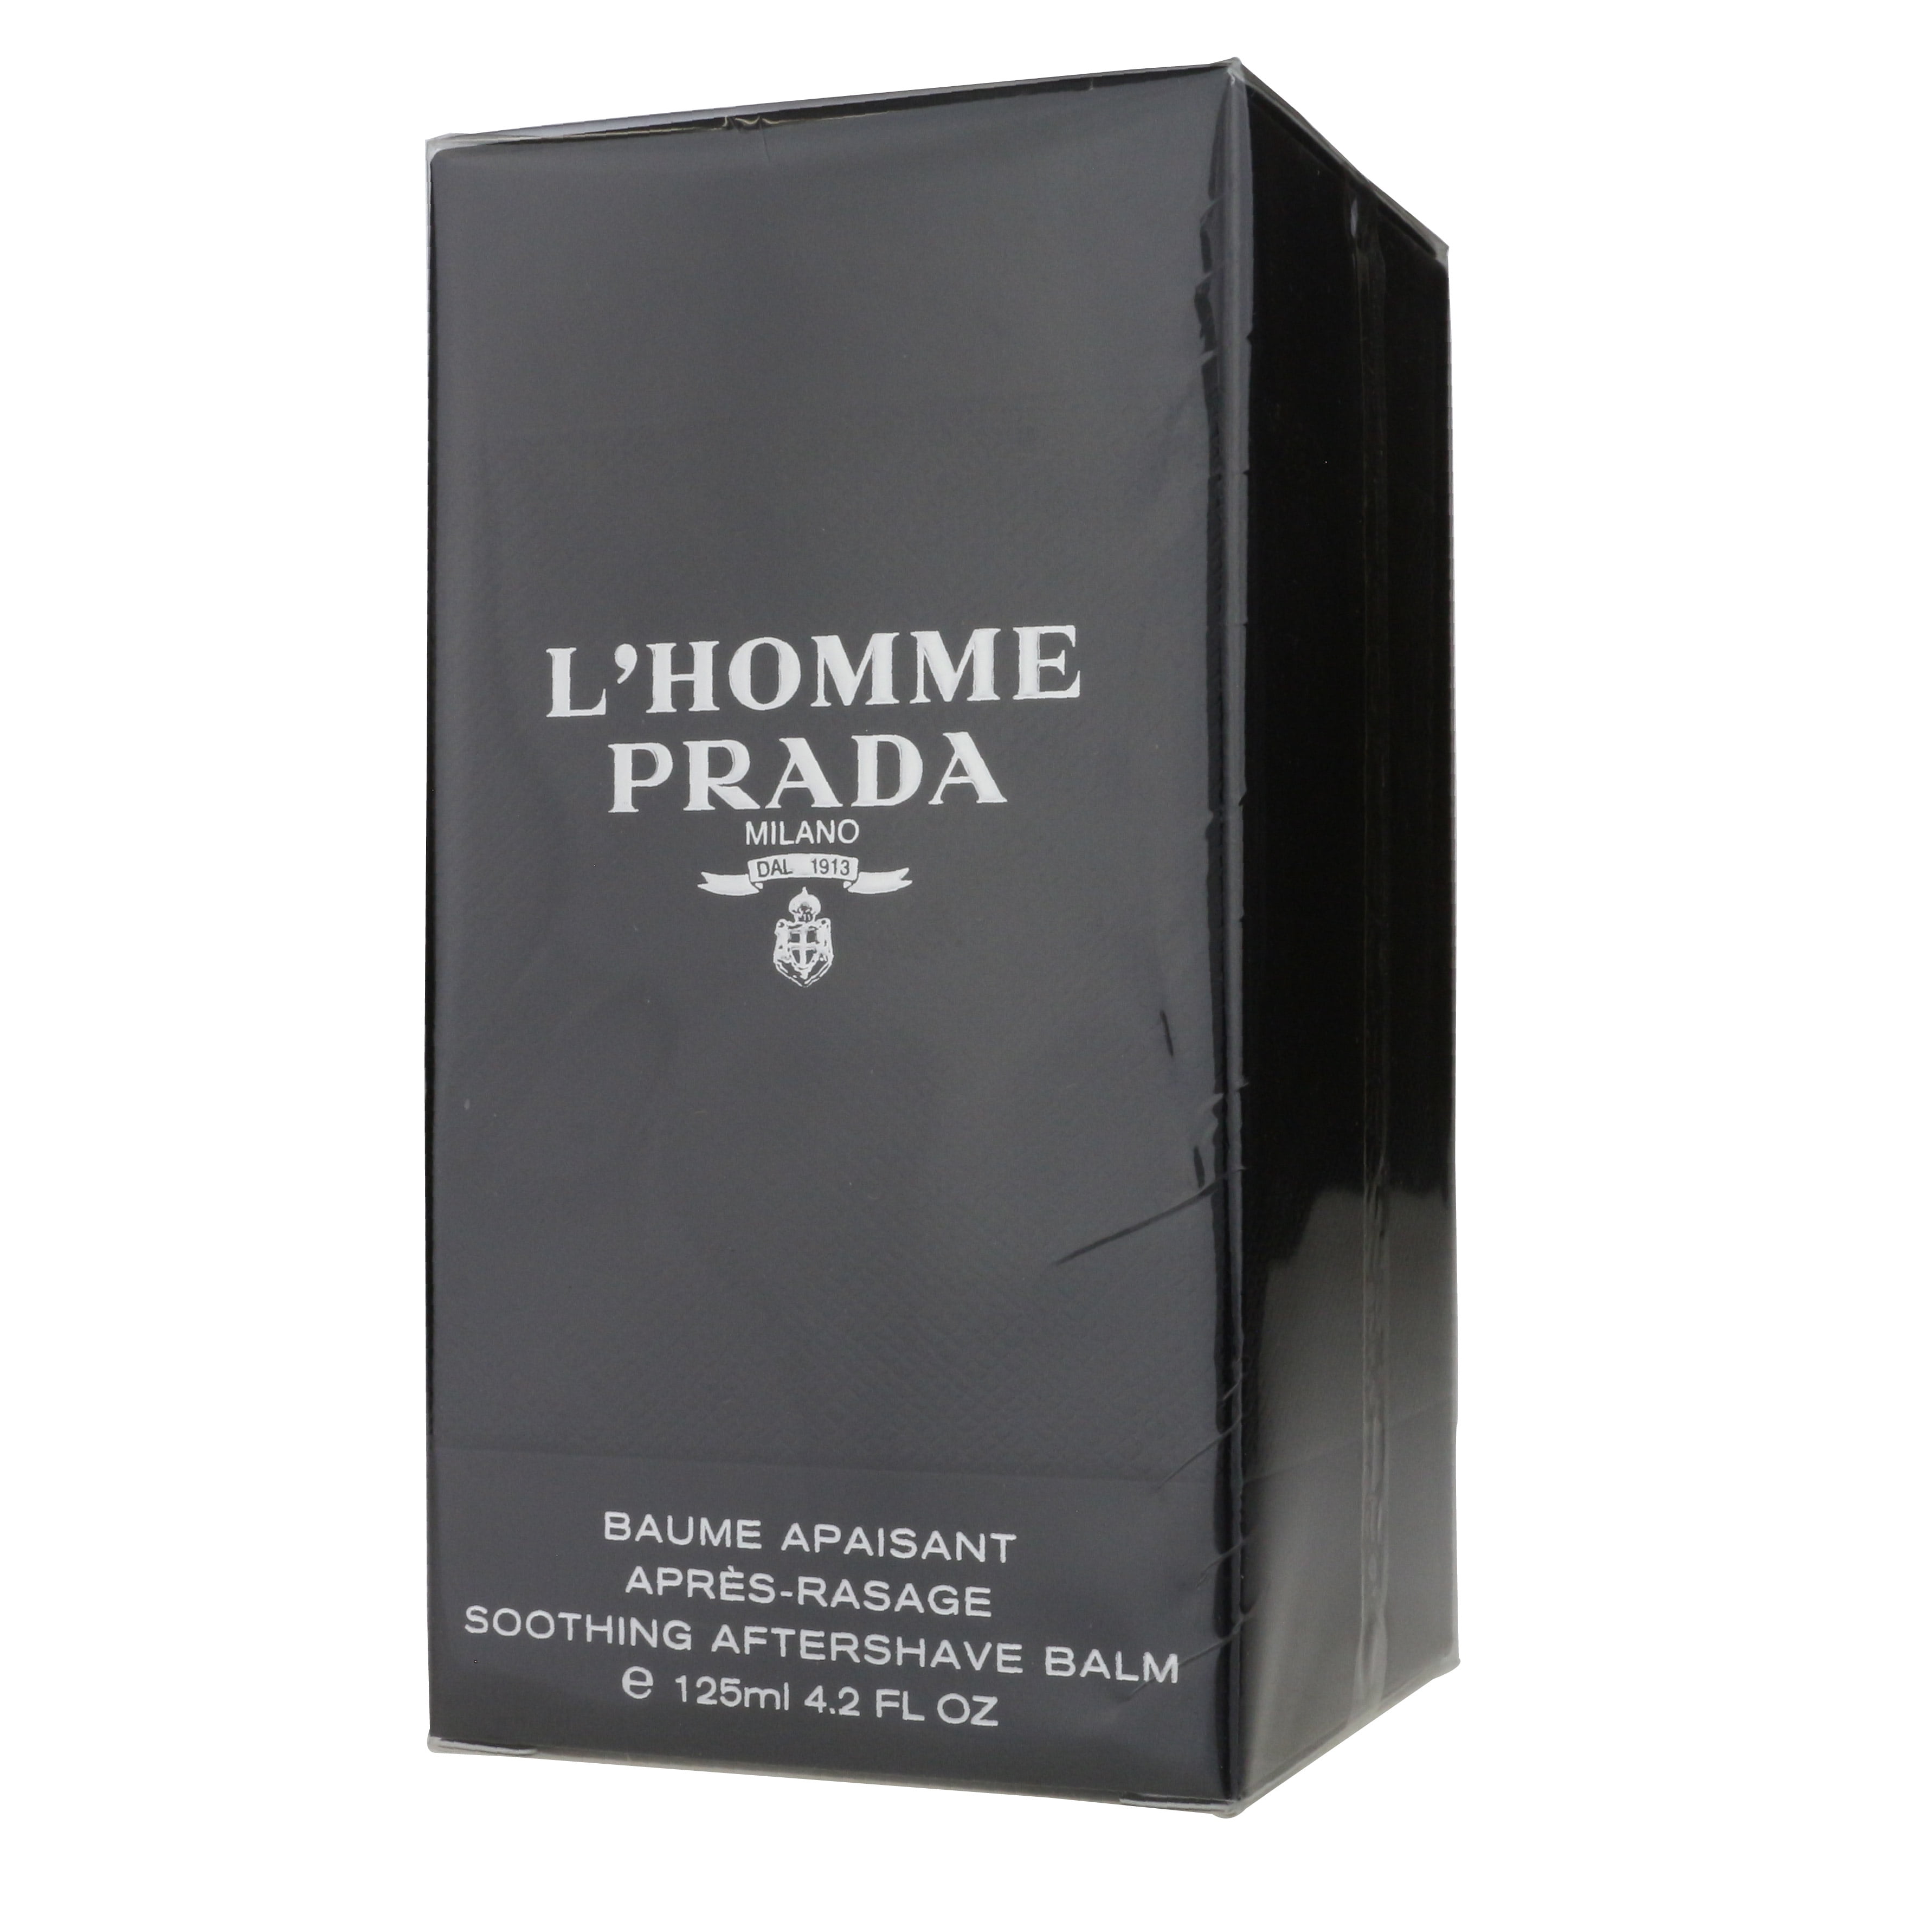 Prada L'Homme Soothing After Shave Balm /125ml New In Box 